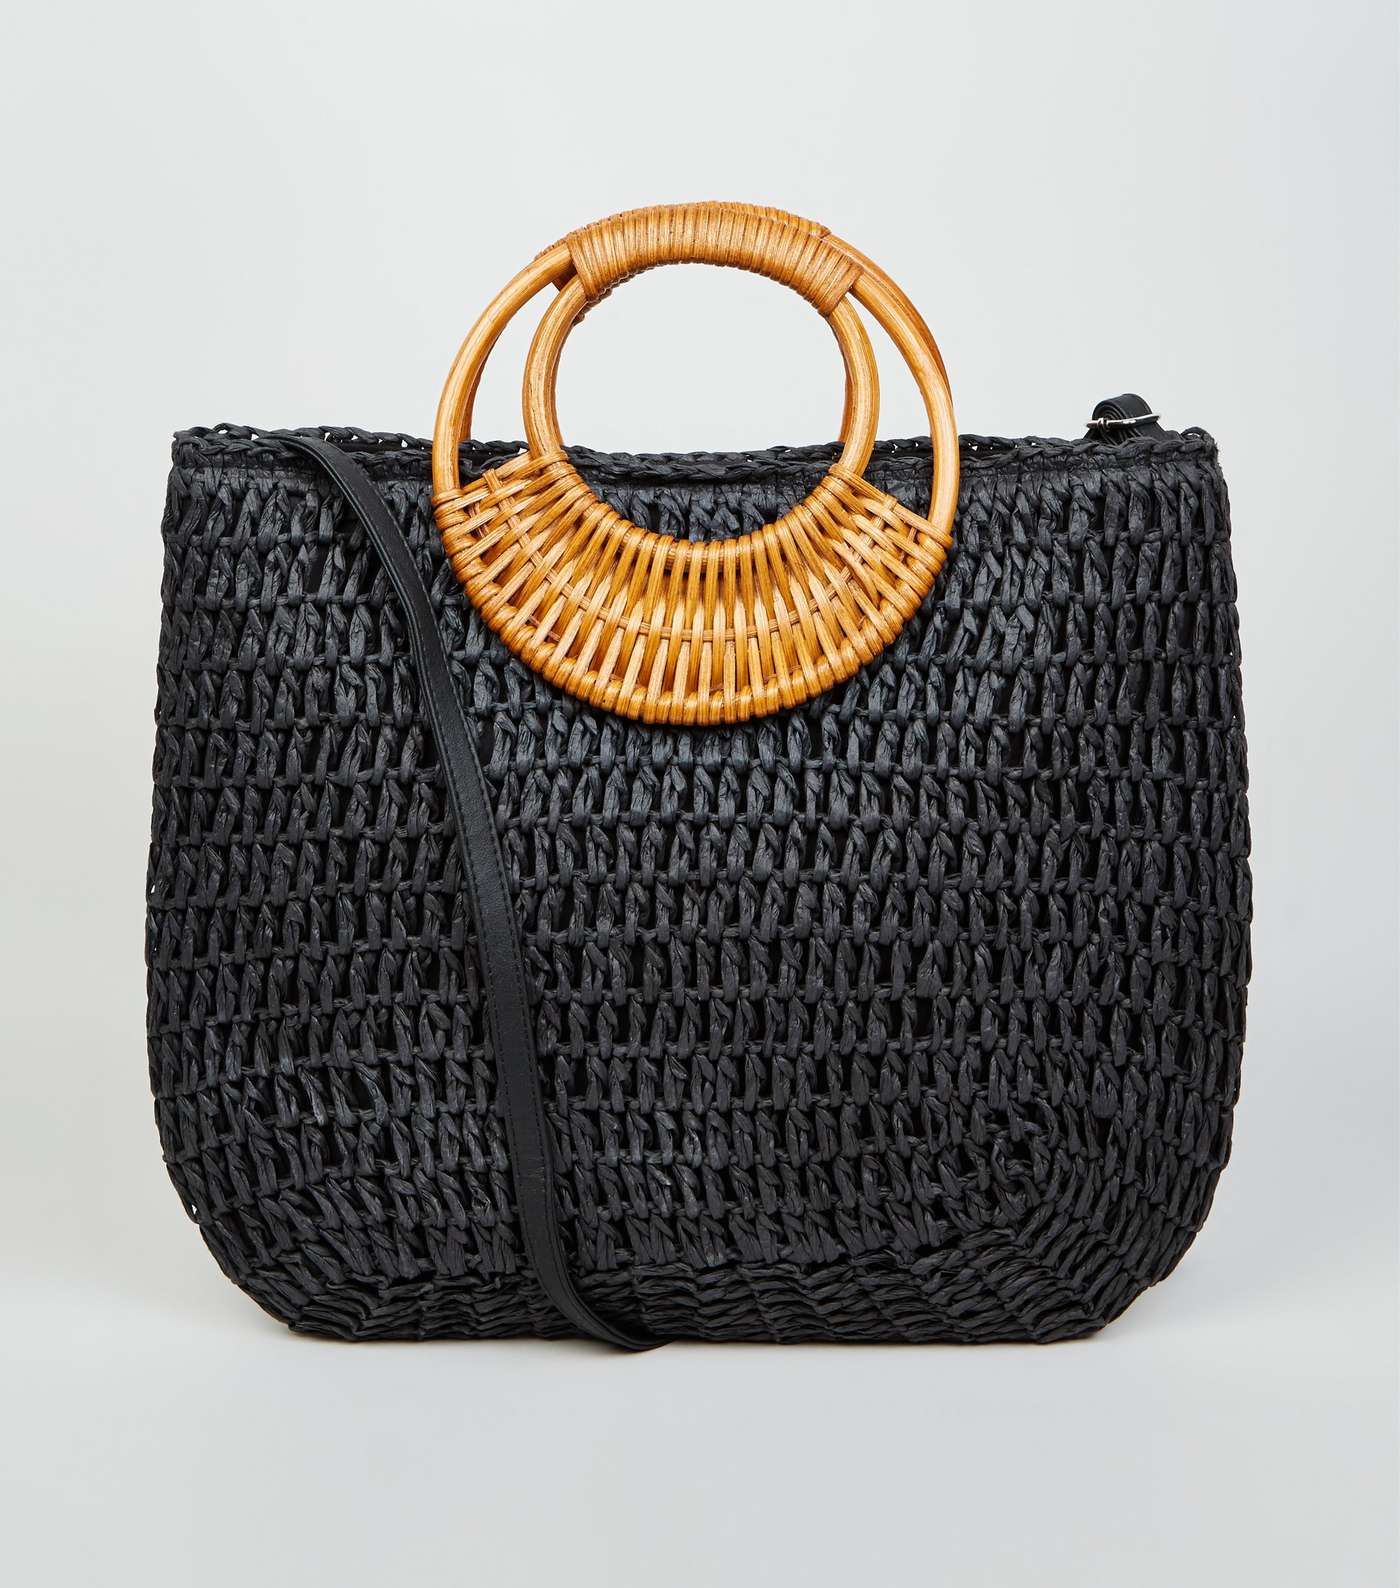 Black Straw Effect Woven Handle Tote Bag